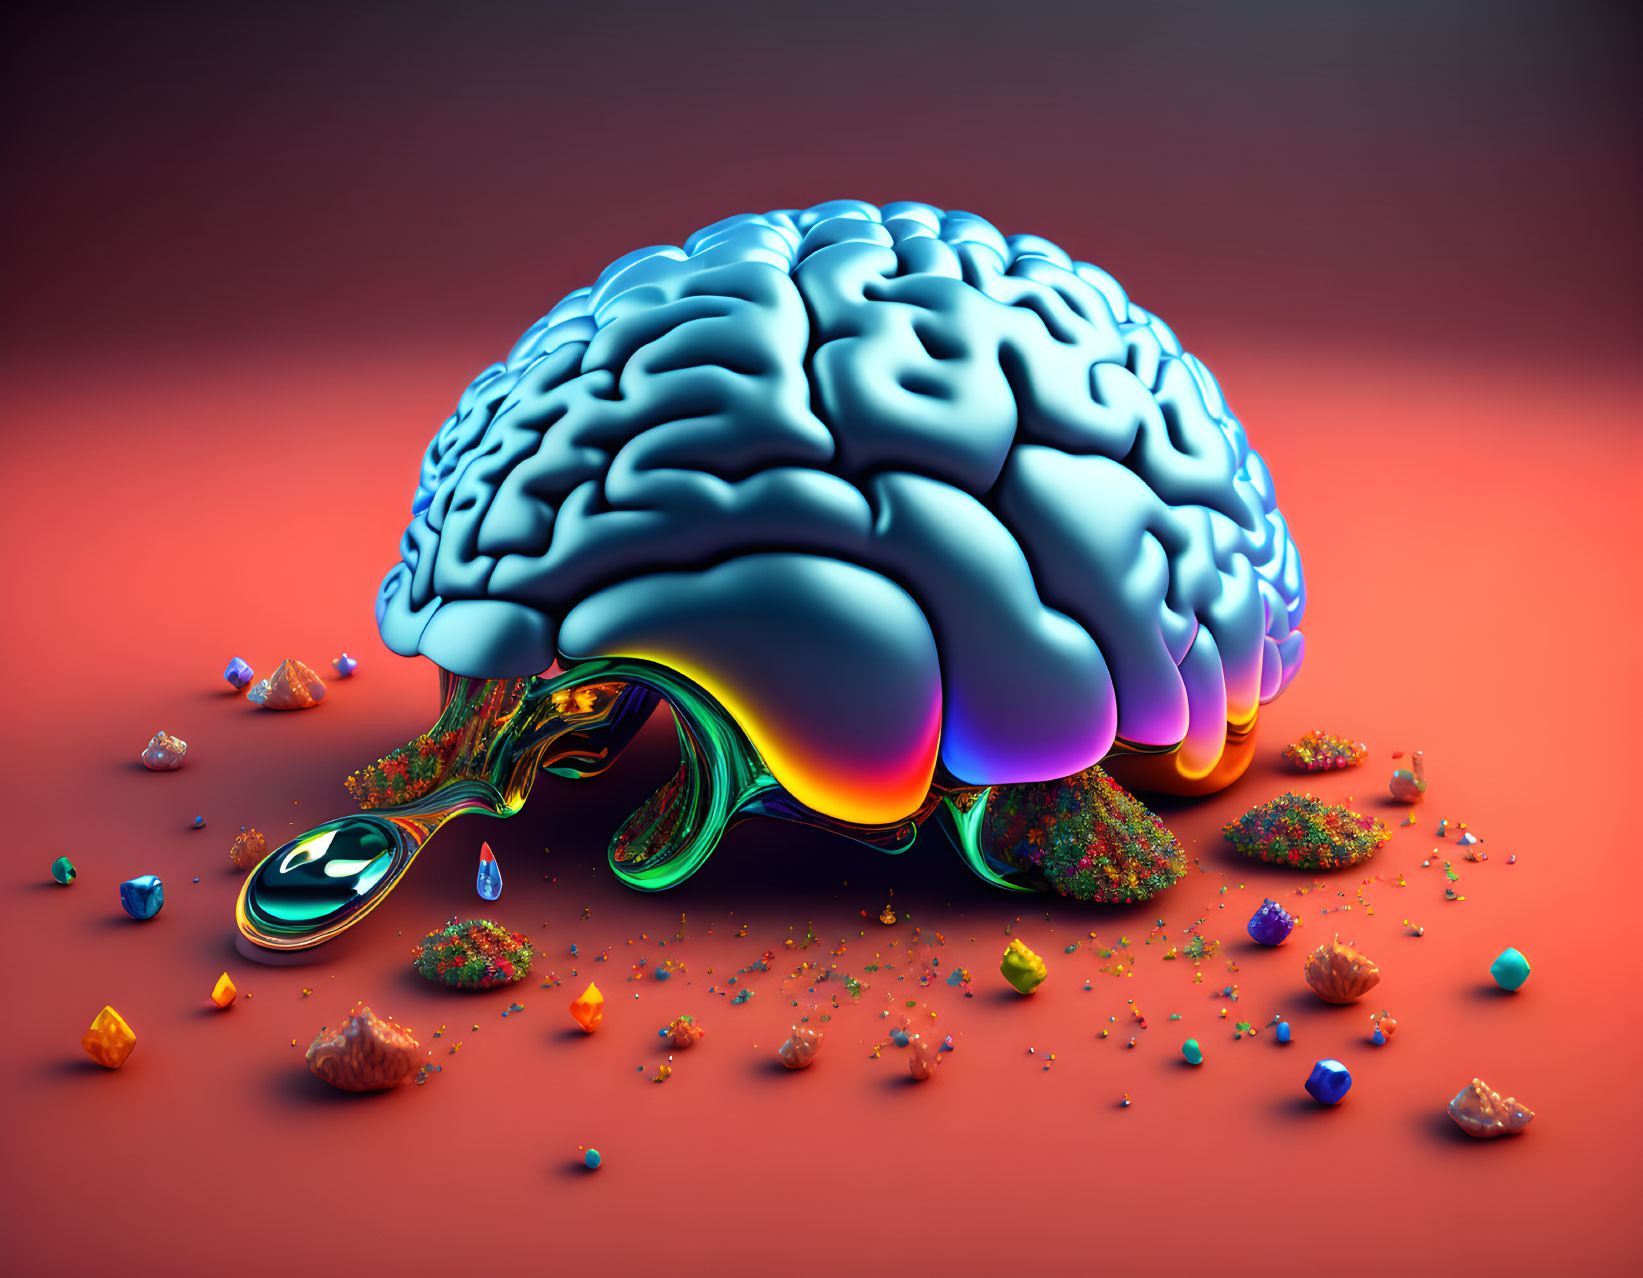 Vibrant surreal brain illustration with melting effect on red background